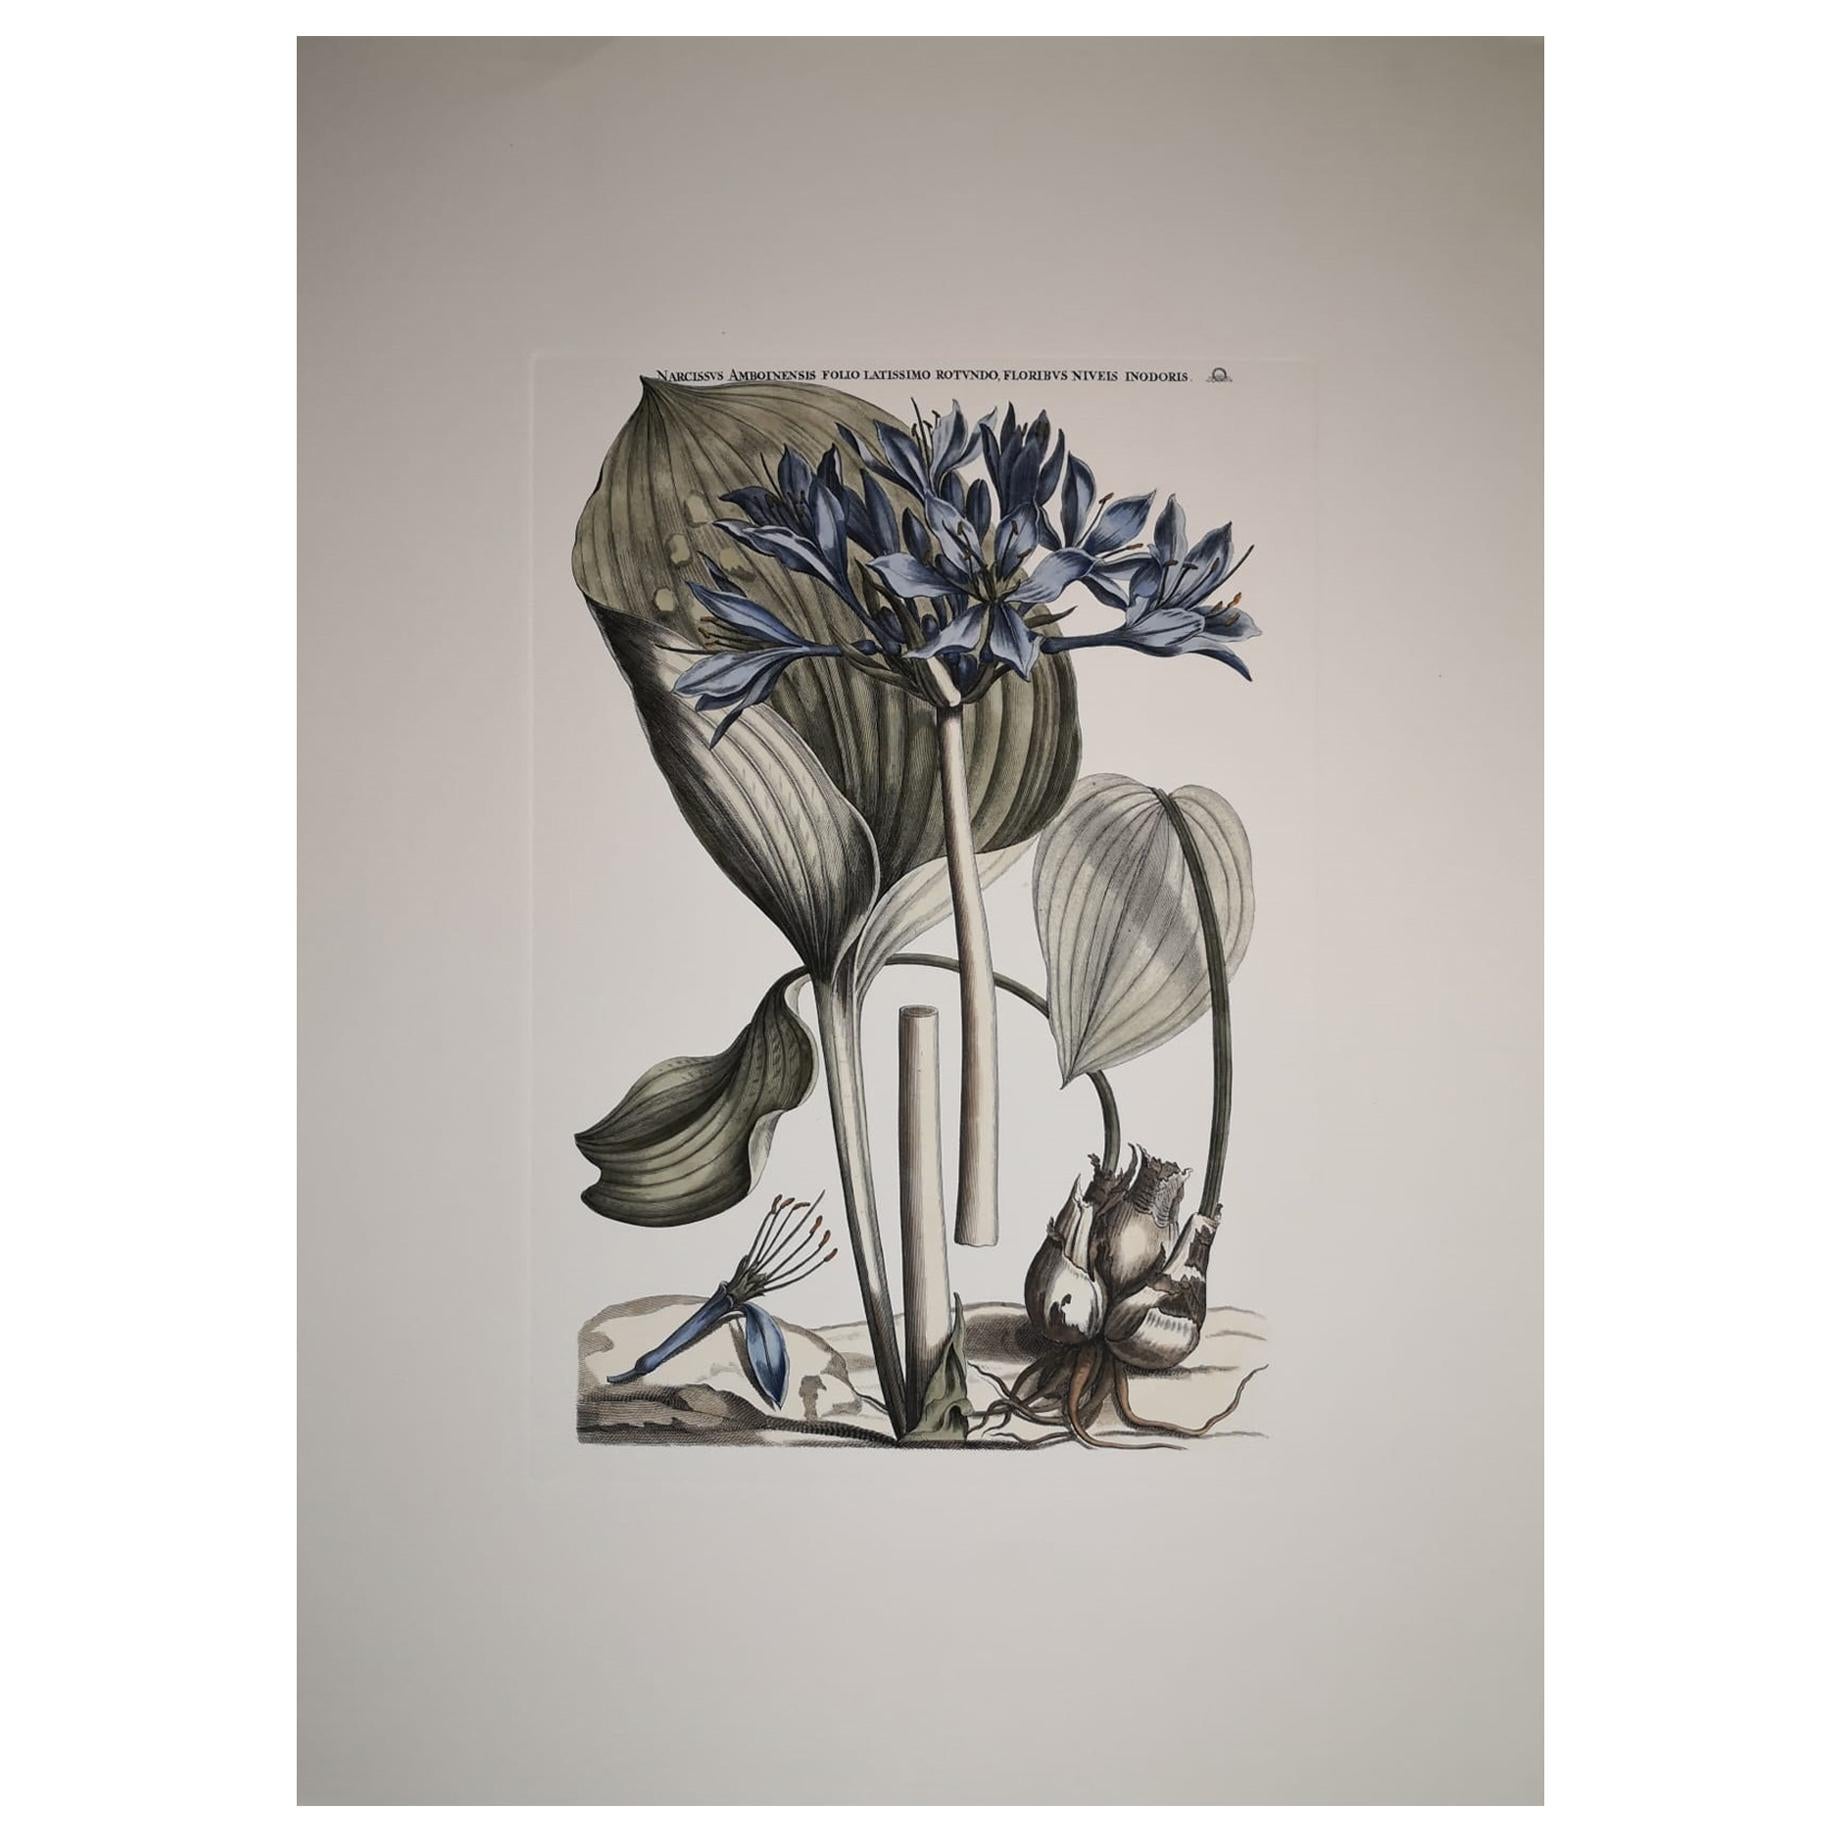 Italian Contemporary Hand Painted Botanical Print "Narcissus Amboineris " For Sale